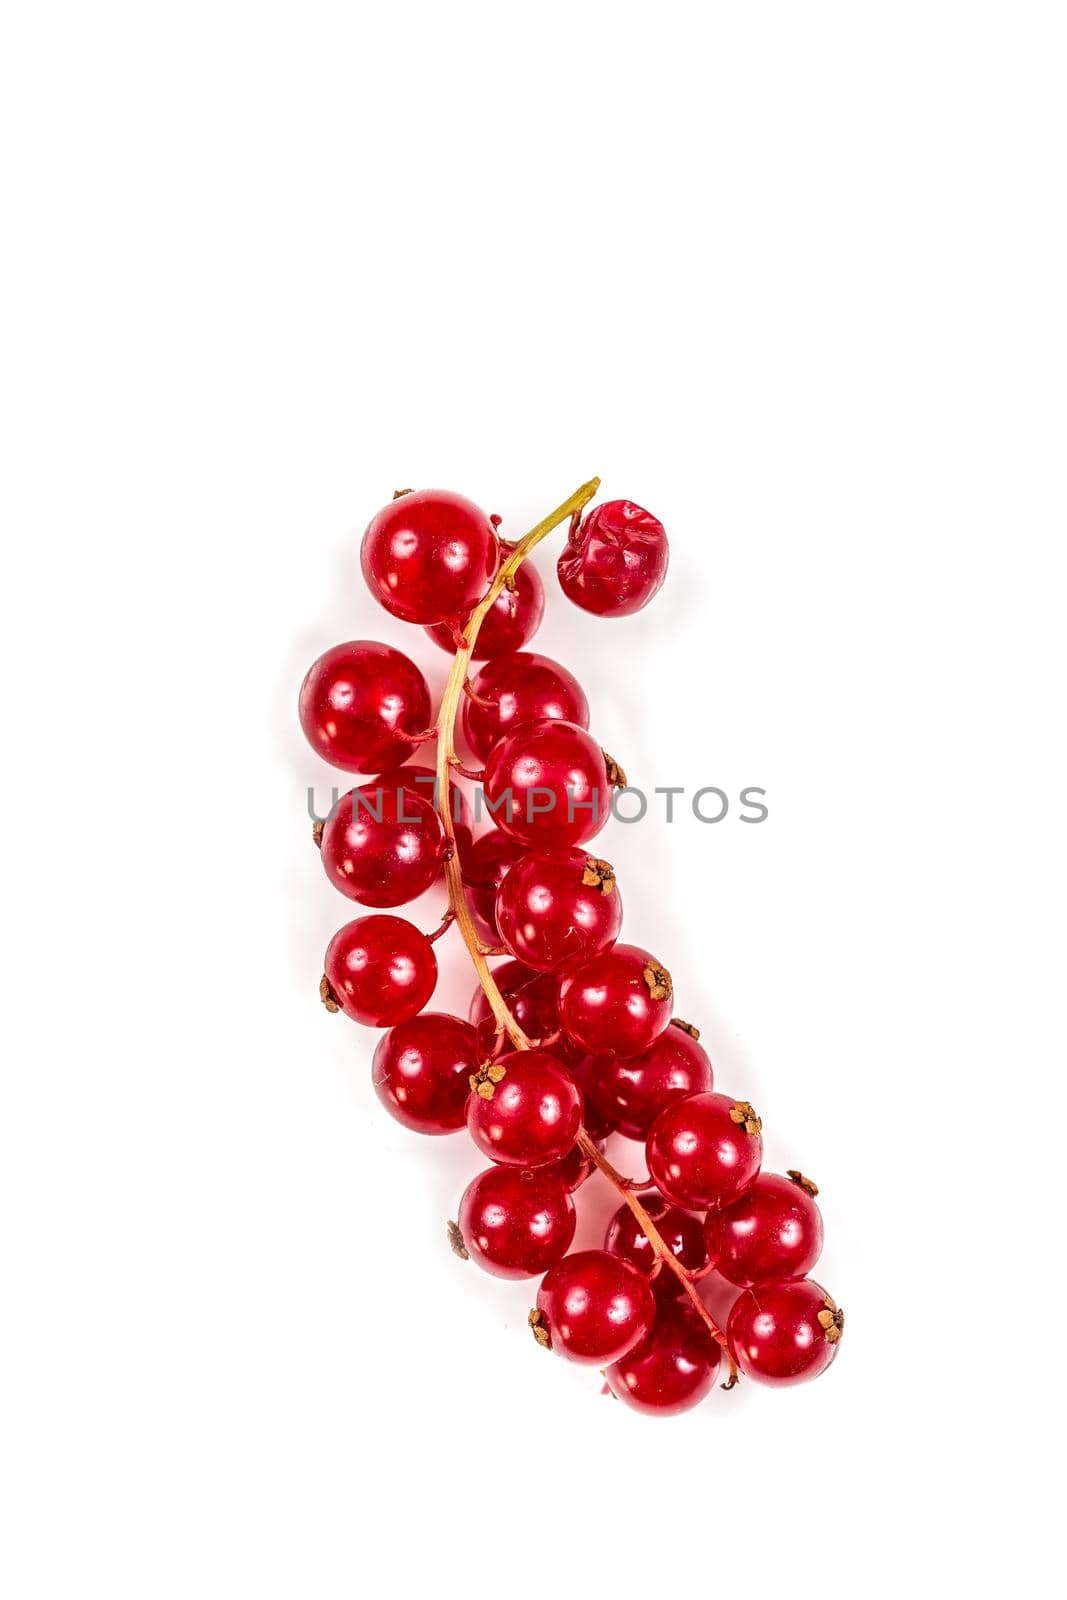 Gooseberry cluster on a cropped white background